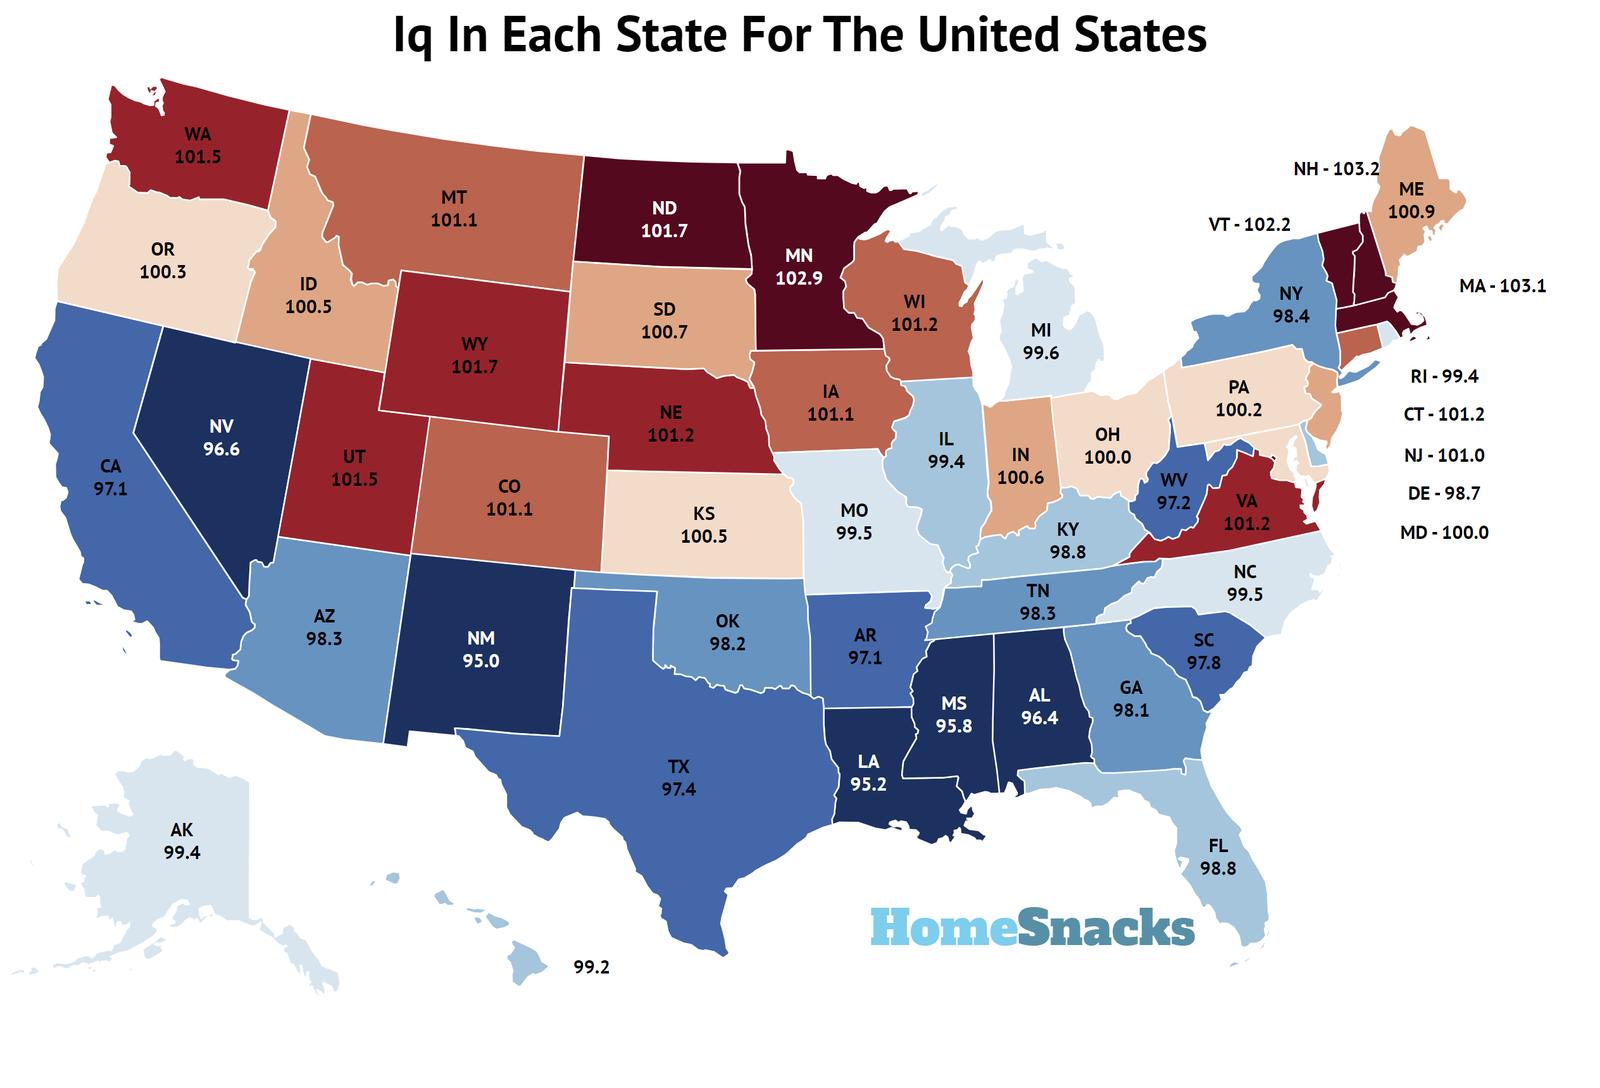 Average IQ By State In The United States